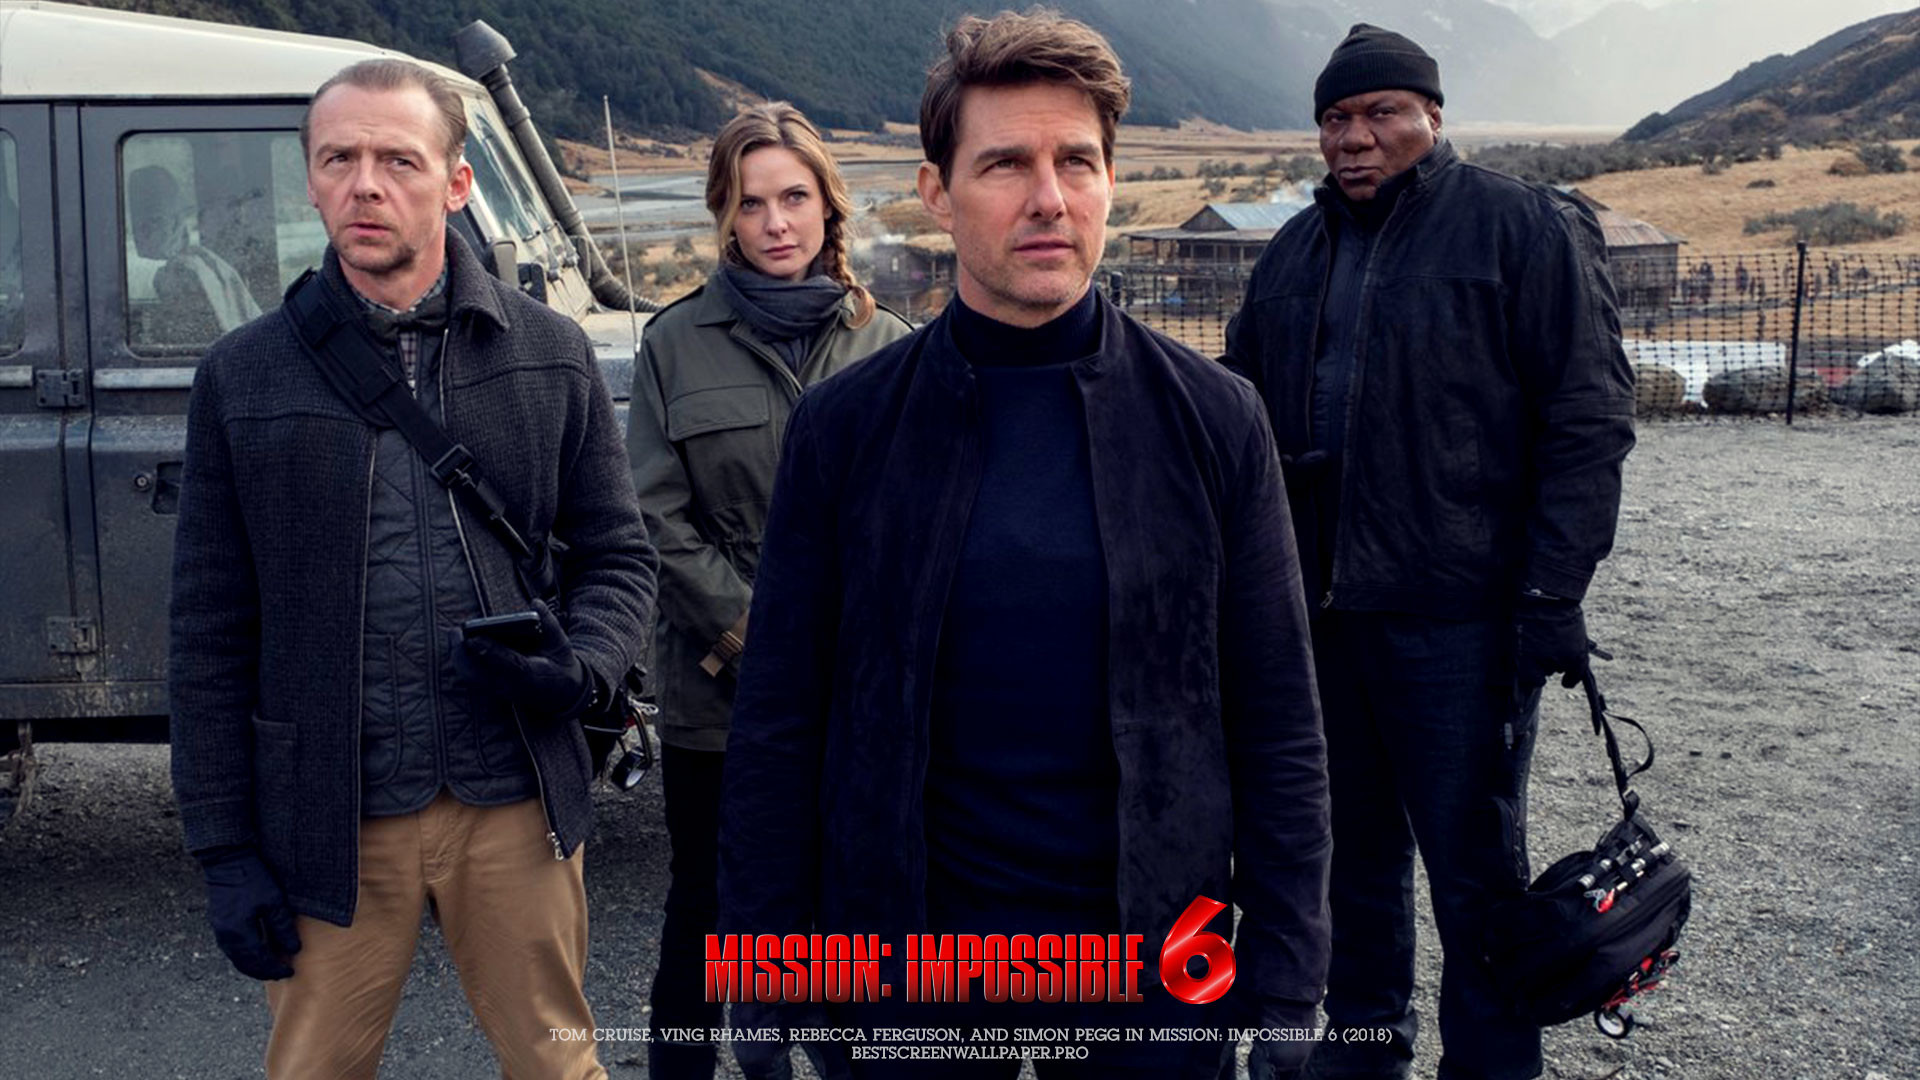 1920x1080 Mission Impossible 6 movie wallpaper HD film release July 2018 USA poster  image iphone